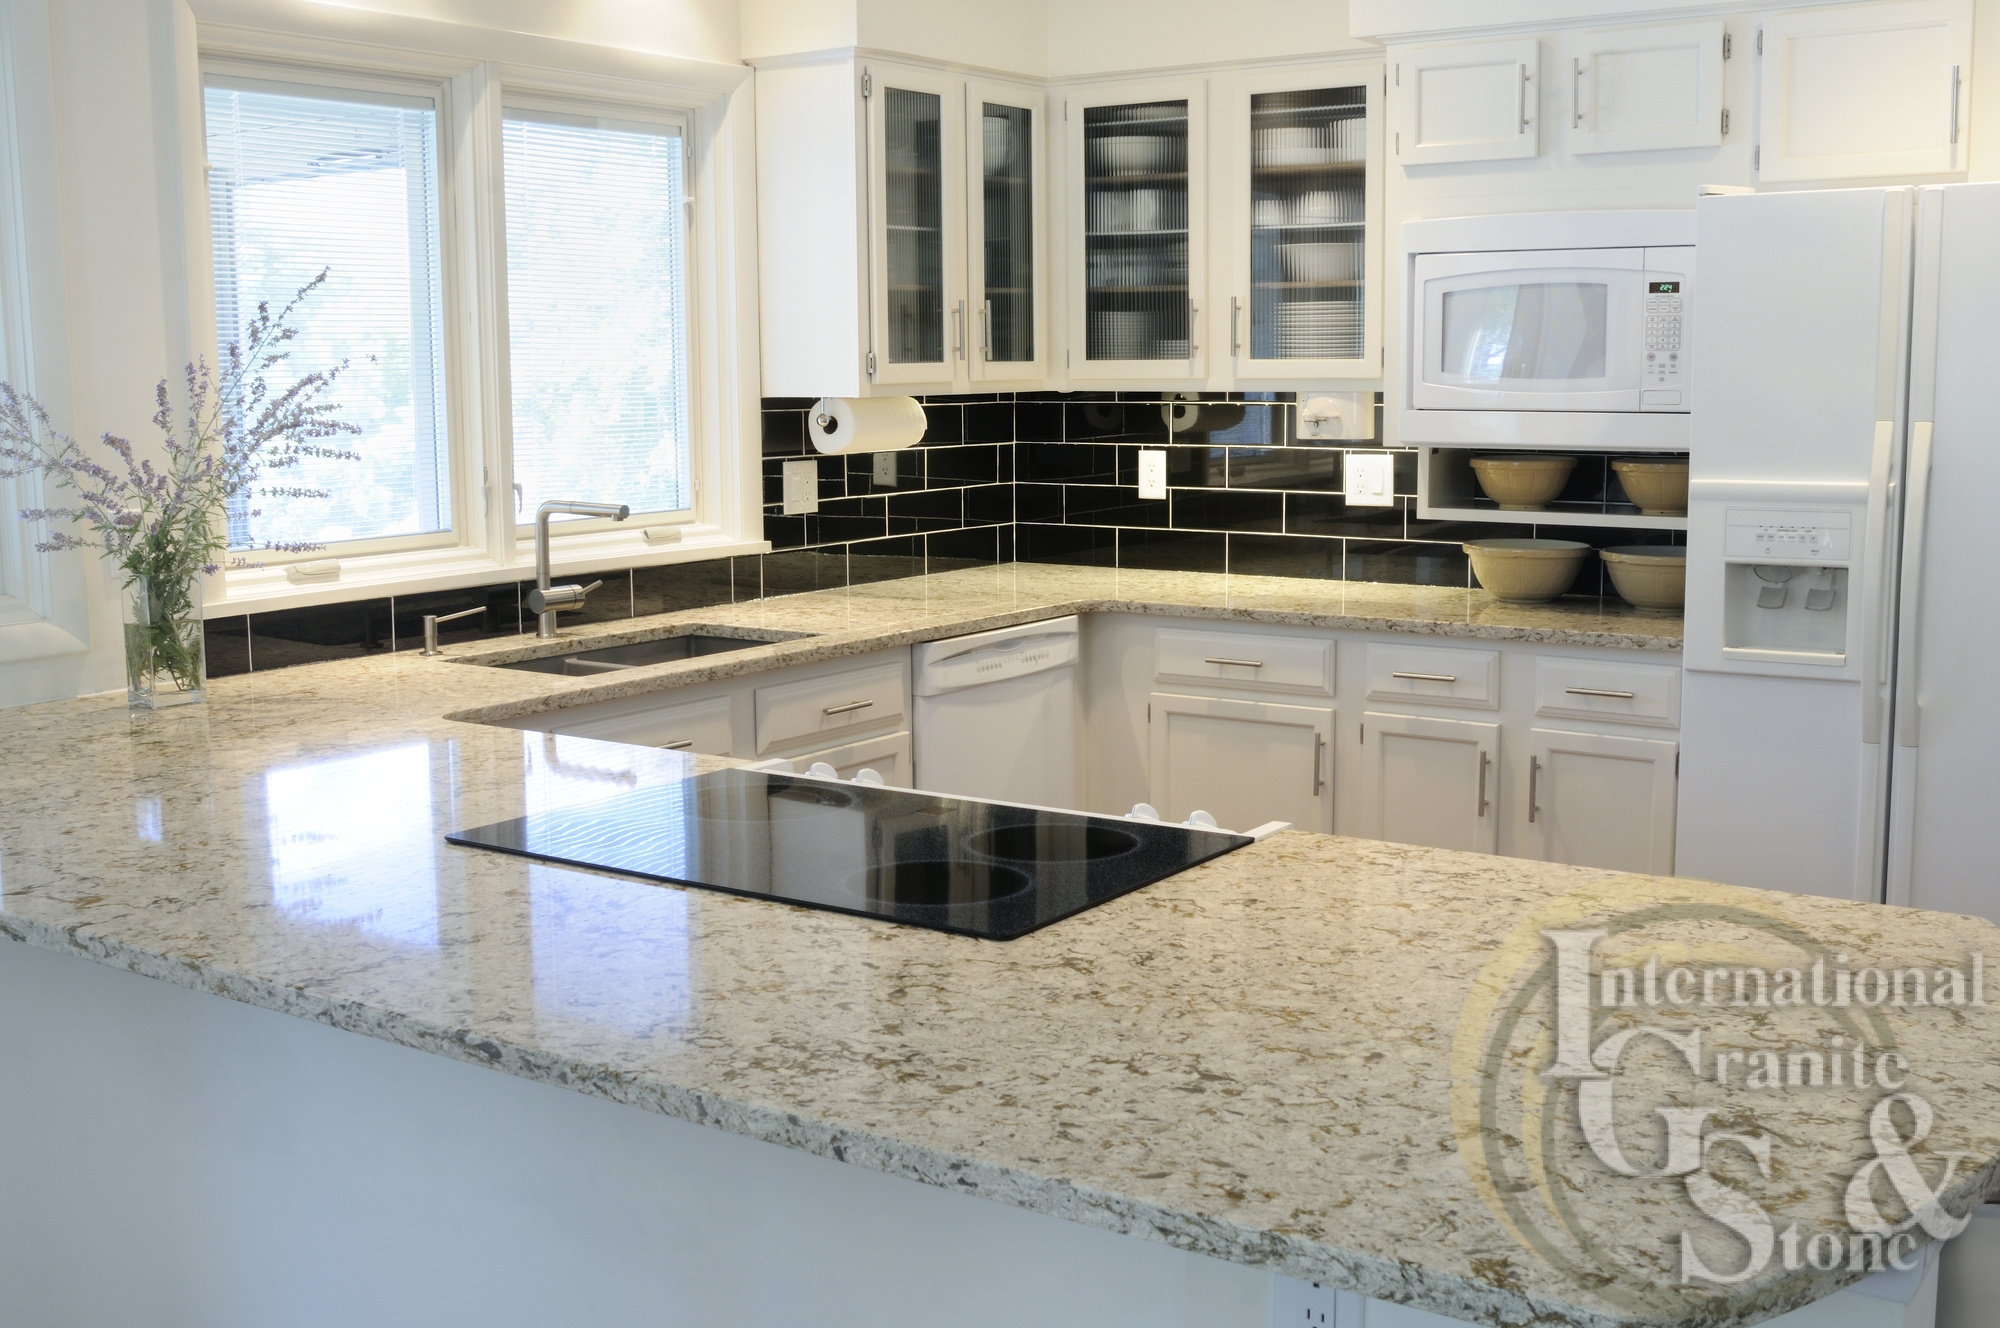 8 Facts You Didn't Know About Quartz Countertops